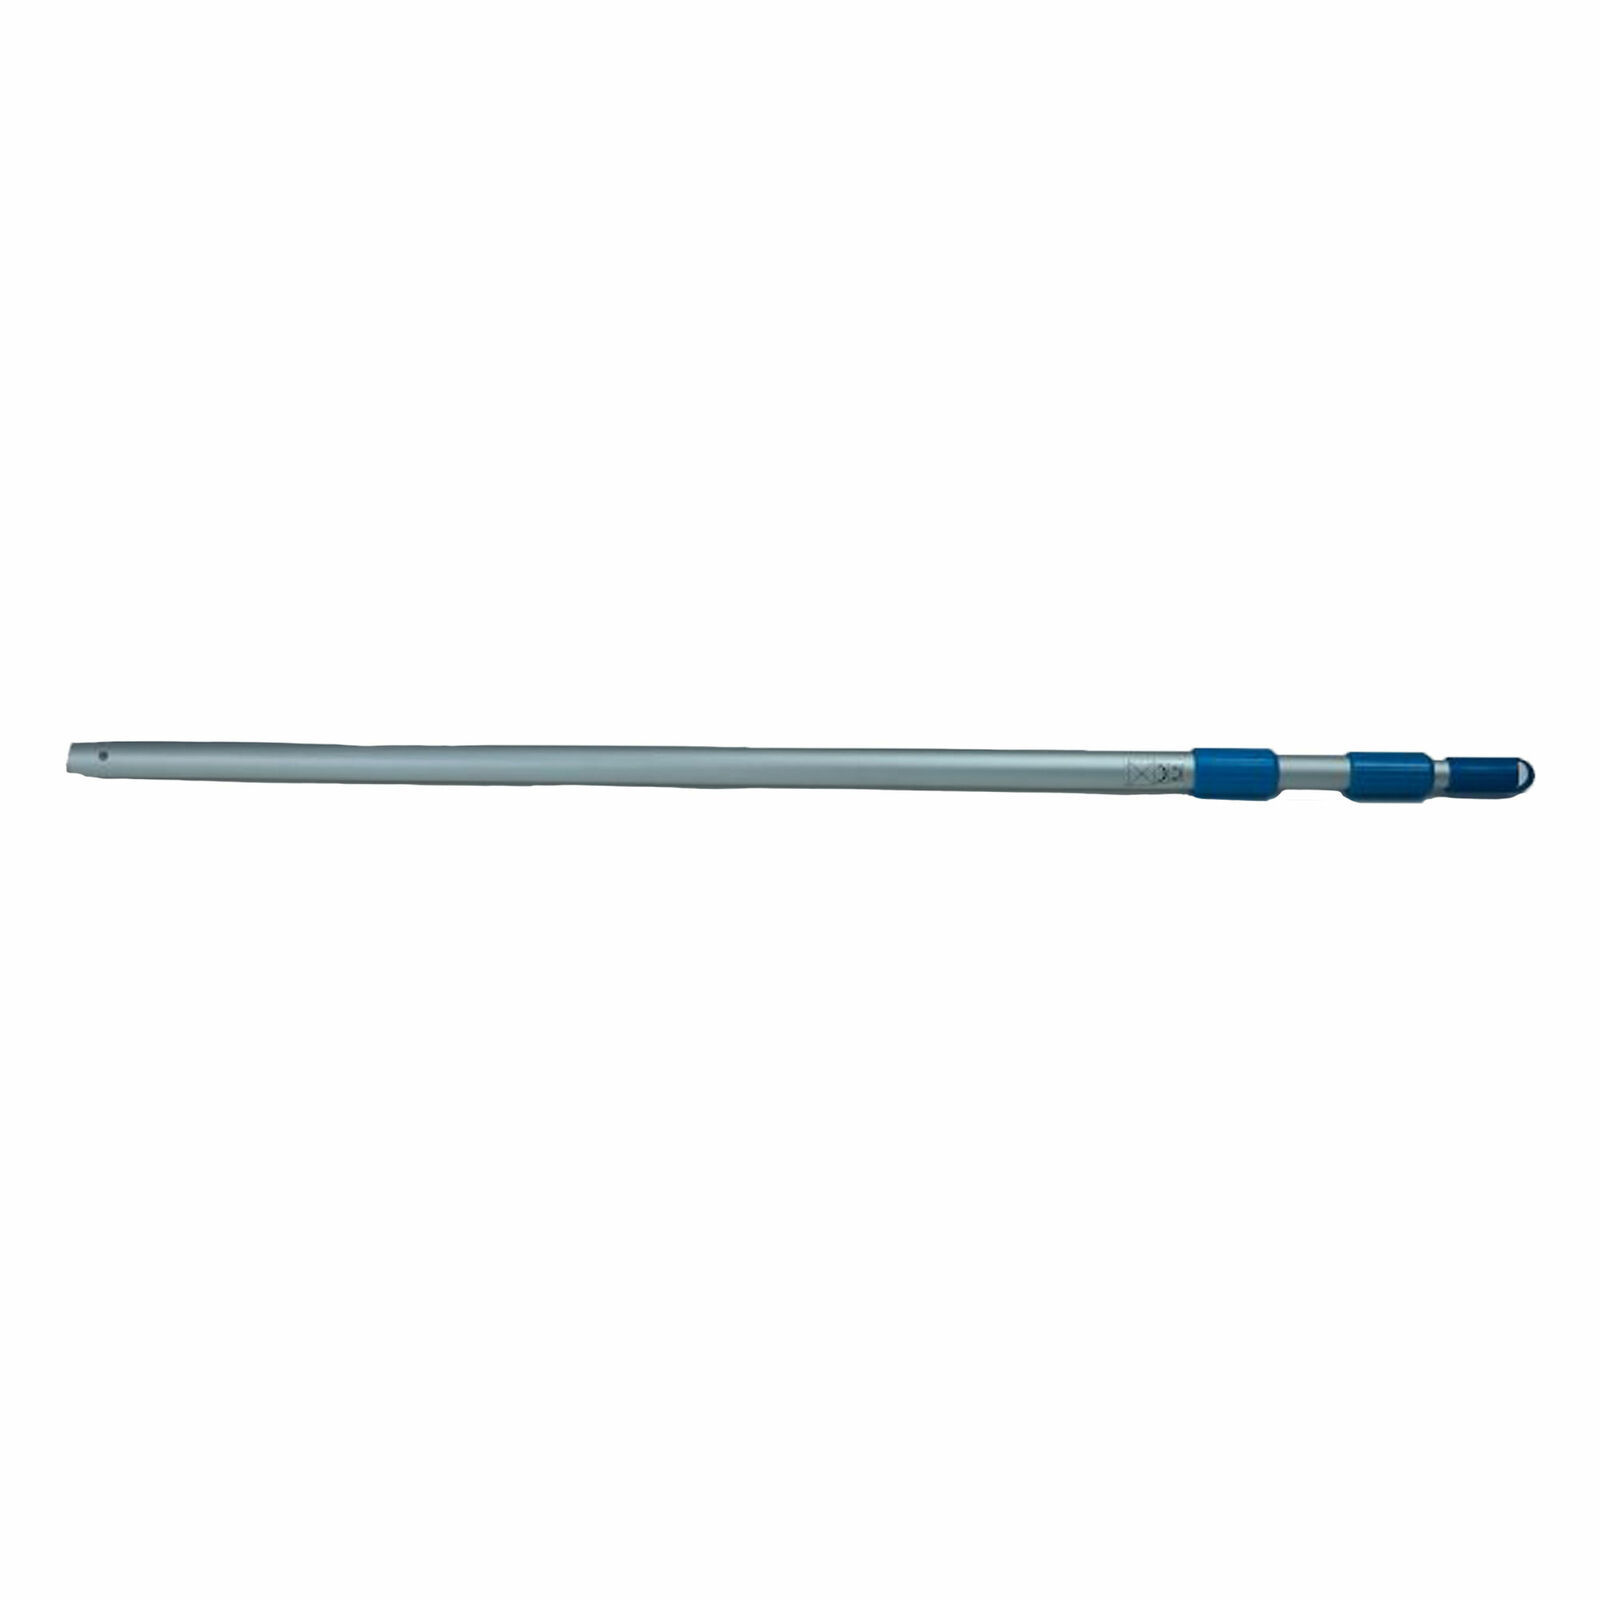 Primary image for Intex 29054E 94 Inch Telescoping Swimming Pool Cleaning Maintenance Pole Shaft